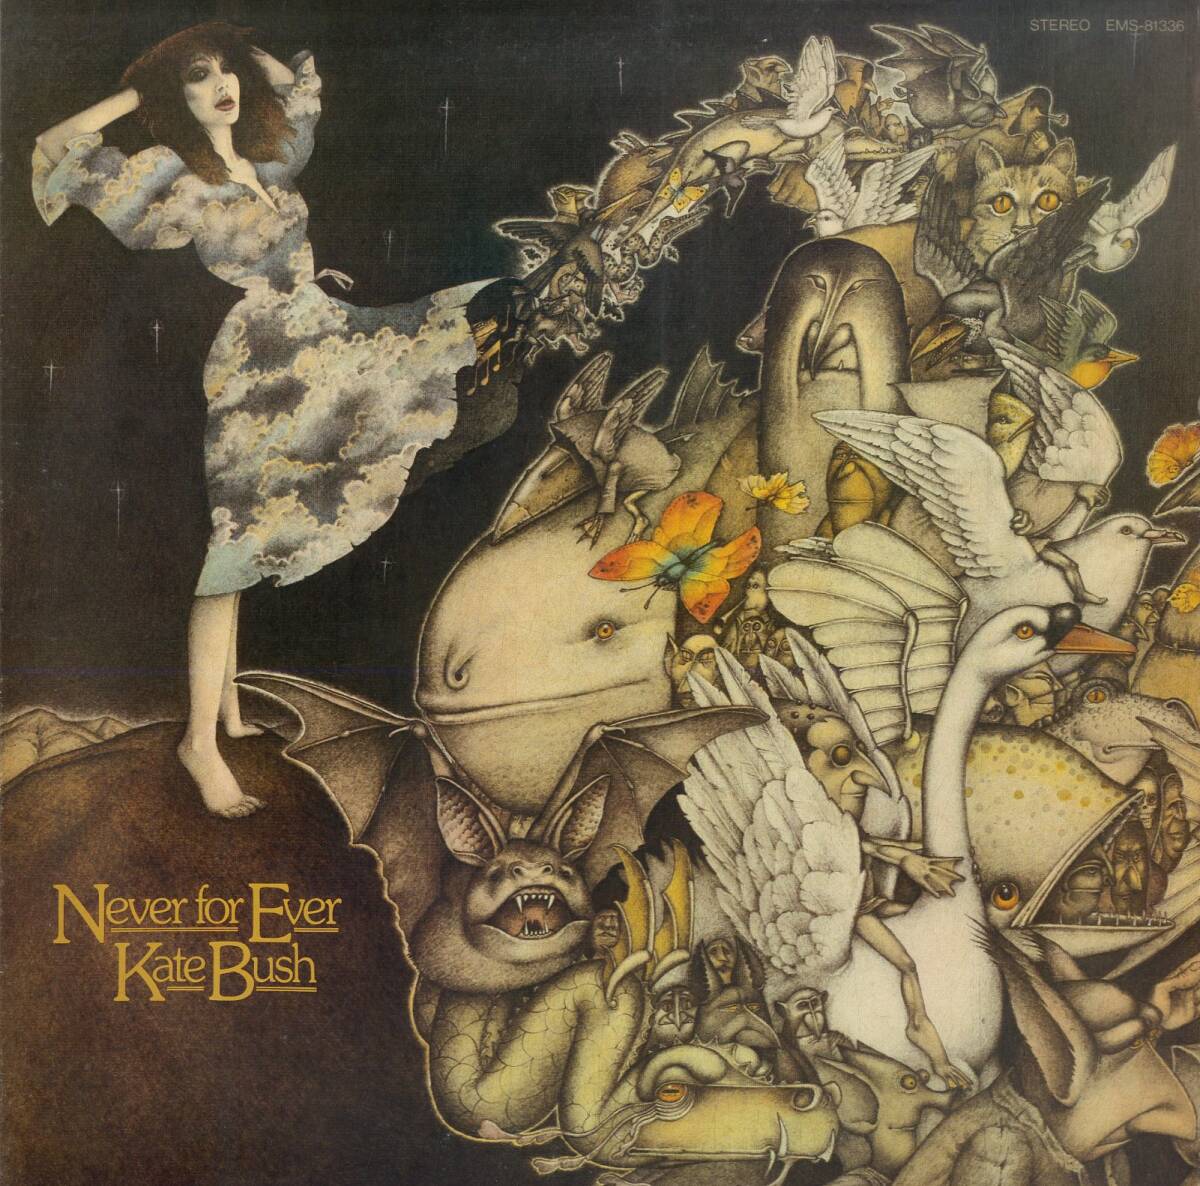 A00584169/LP/ケイト・ブッシュ(KATE BUSH)「魔物語 / Never For Ever (1980年・EMS-81336・アートロック)」_画像1